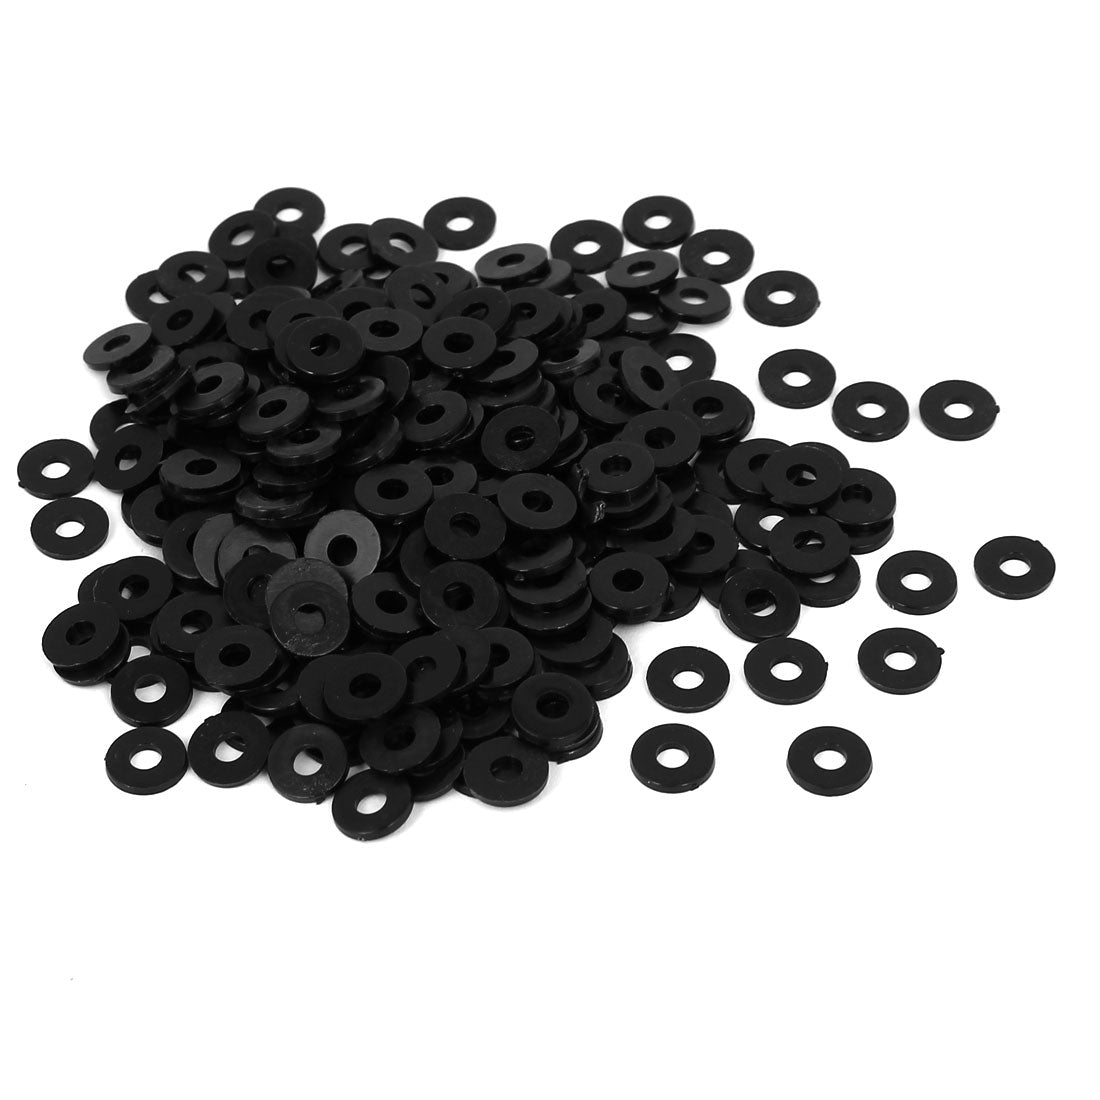 uxcell Uxcell Nylon Flat Insulating Washers Gaskets Spacers Black Packs